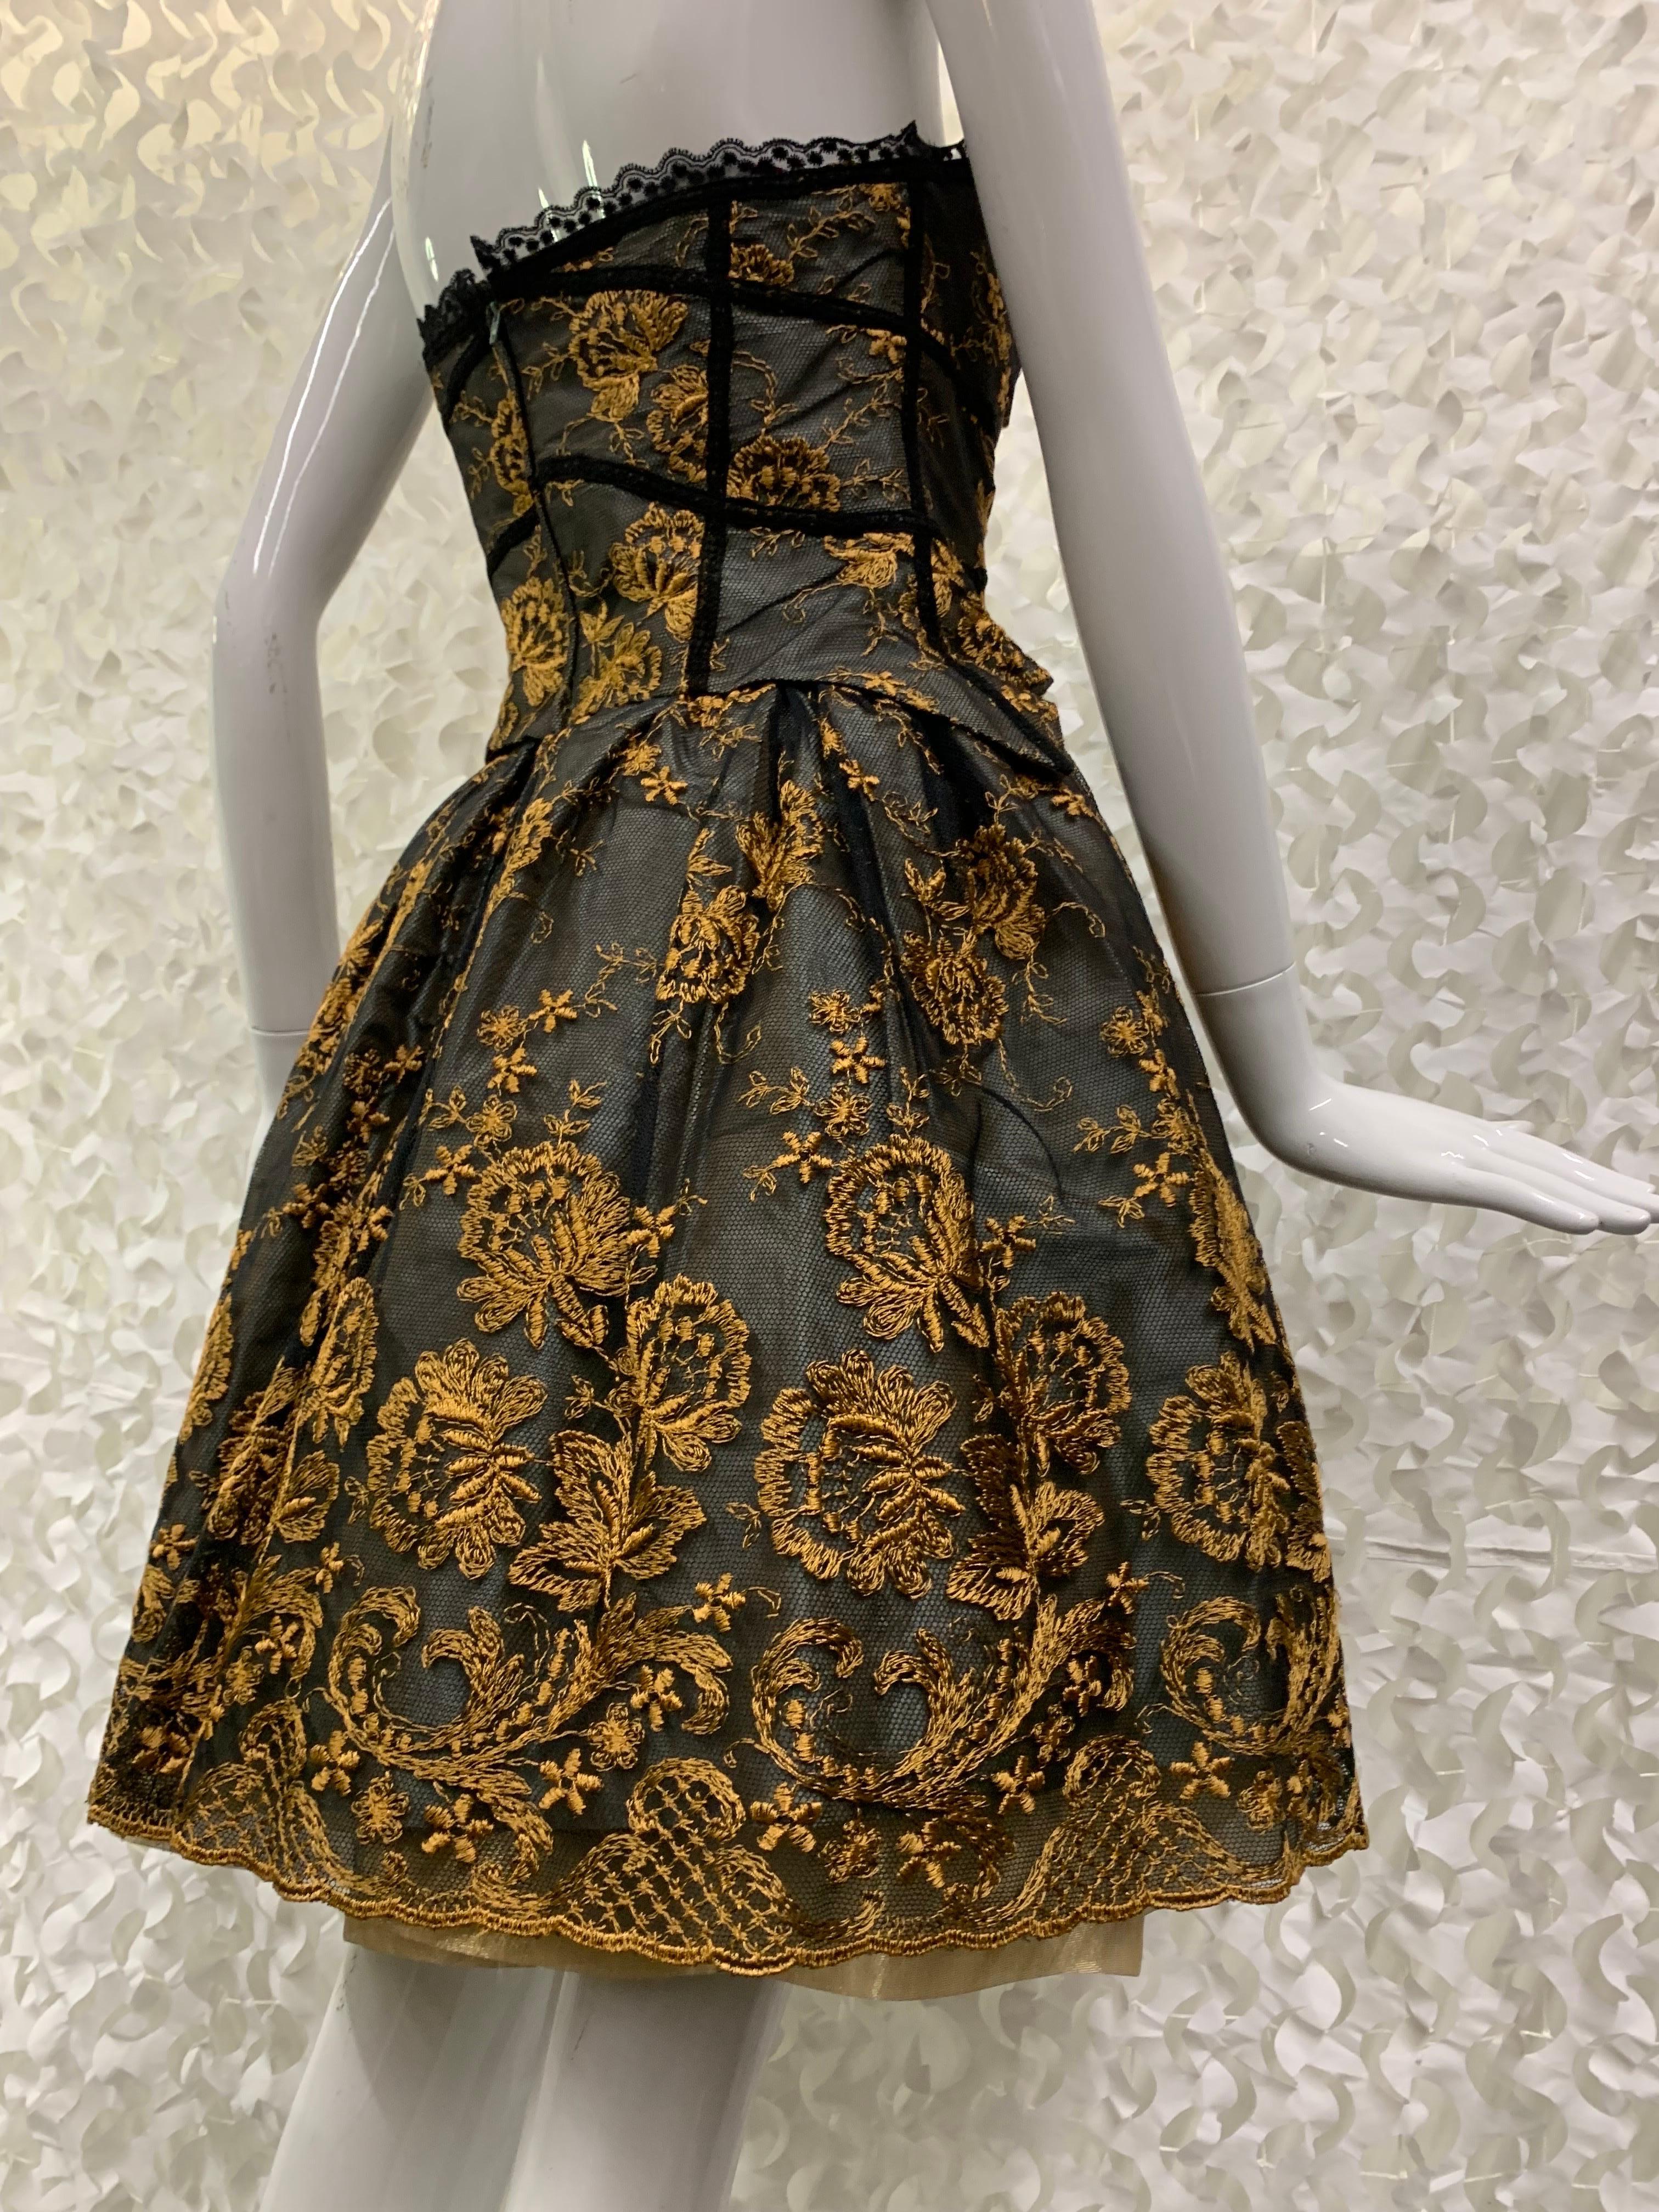 1990s Christian LaCroix Strapless Merry Widow Dress w Pouf Skirt in Black Lace For Sale 6